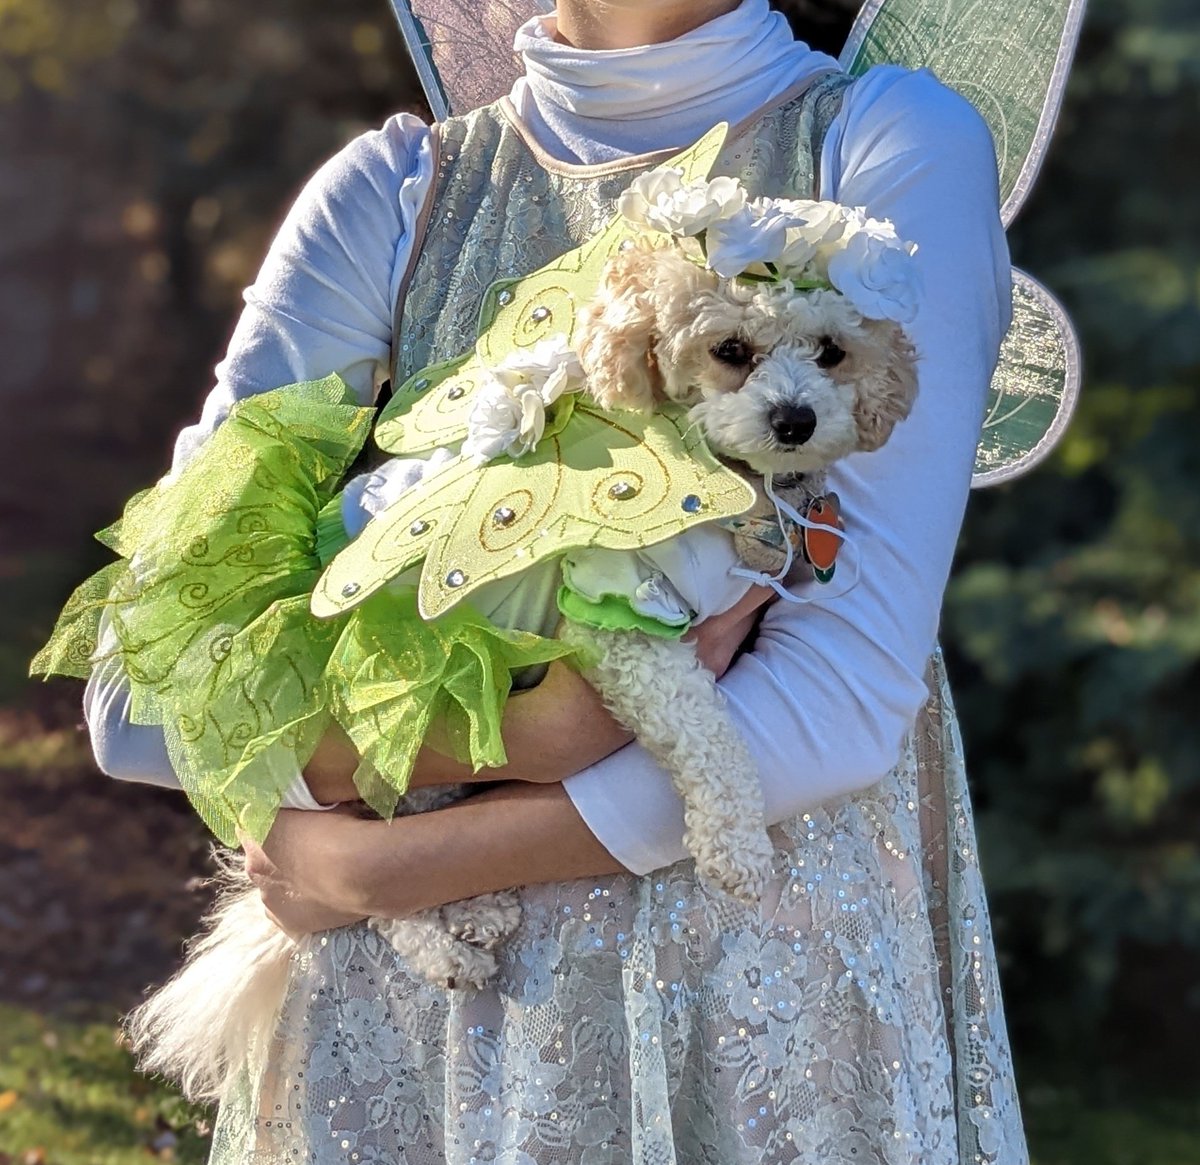 In 2021 I was a bee and hooman was a beekeeper, in 2022 hooman and I were both fairies 🐝🧚‍♀️ Any guesses of what our costumes are this year?